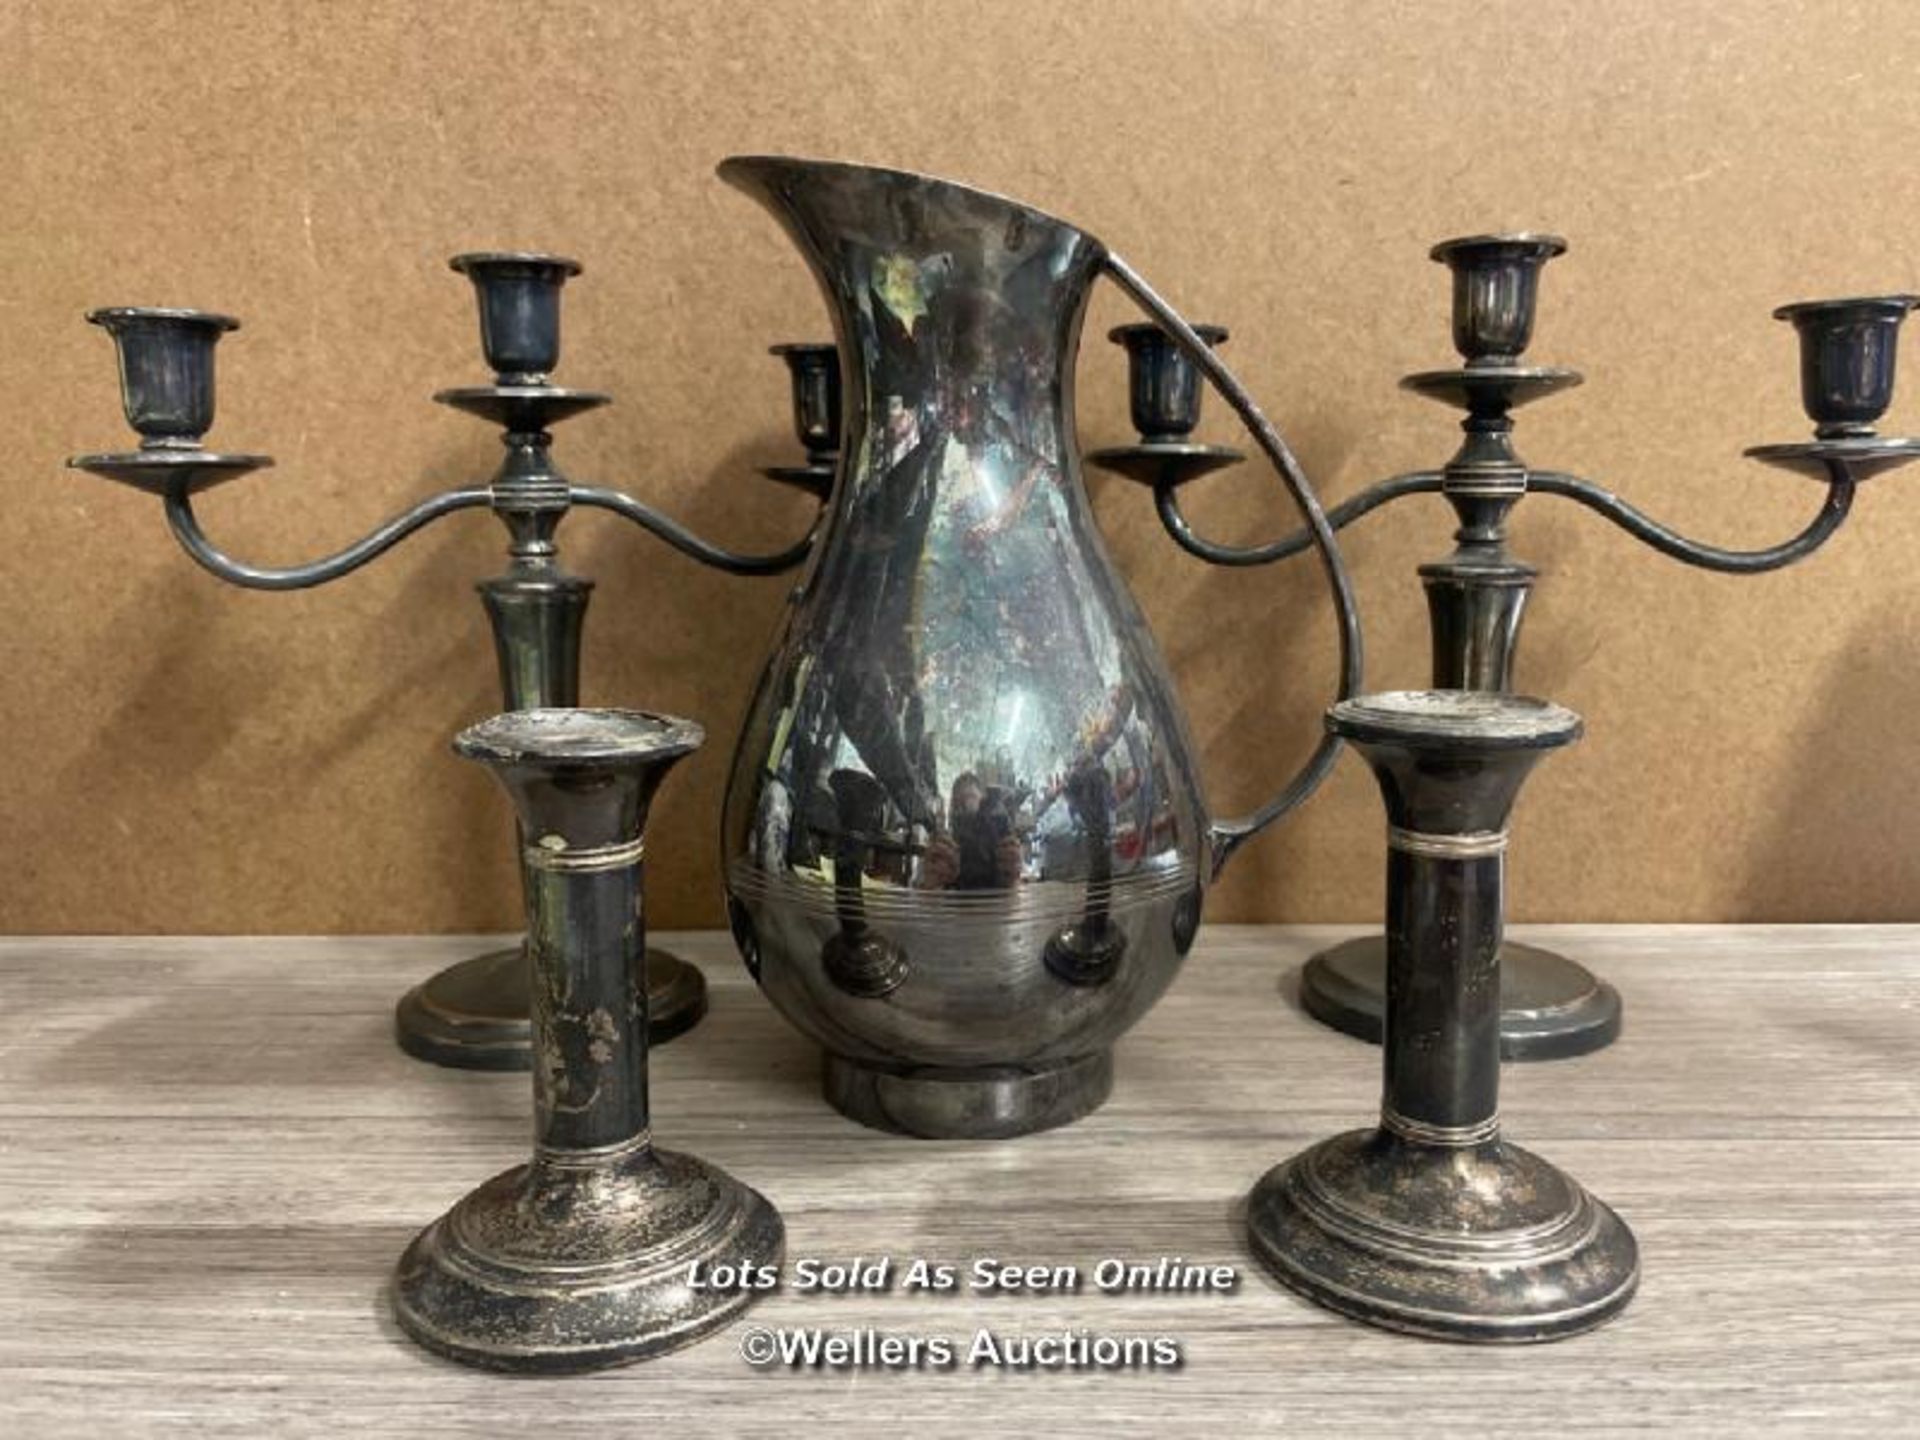 METAL WARE INCLUDING WATER JUG, TWO 3 ARMED CANDLE HOLDERS AND TWO SINGLE CANDLE HOLDERS (5)